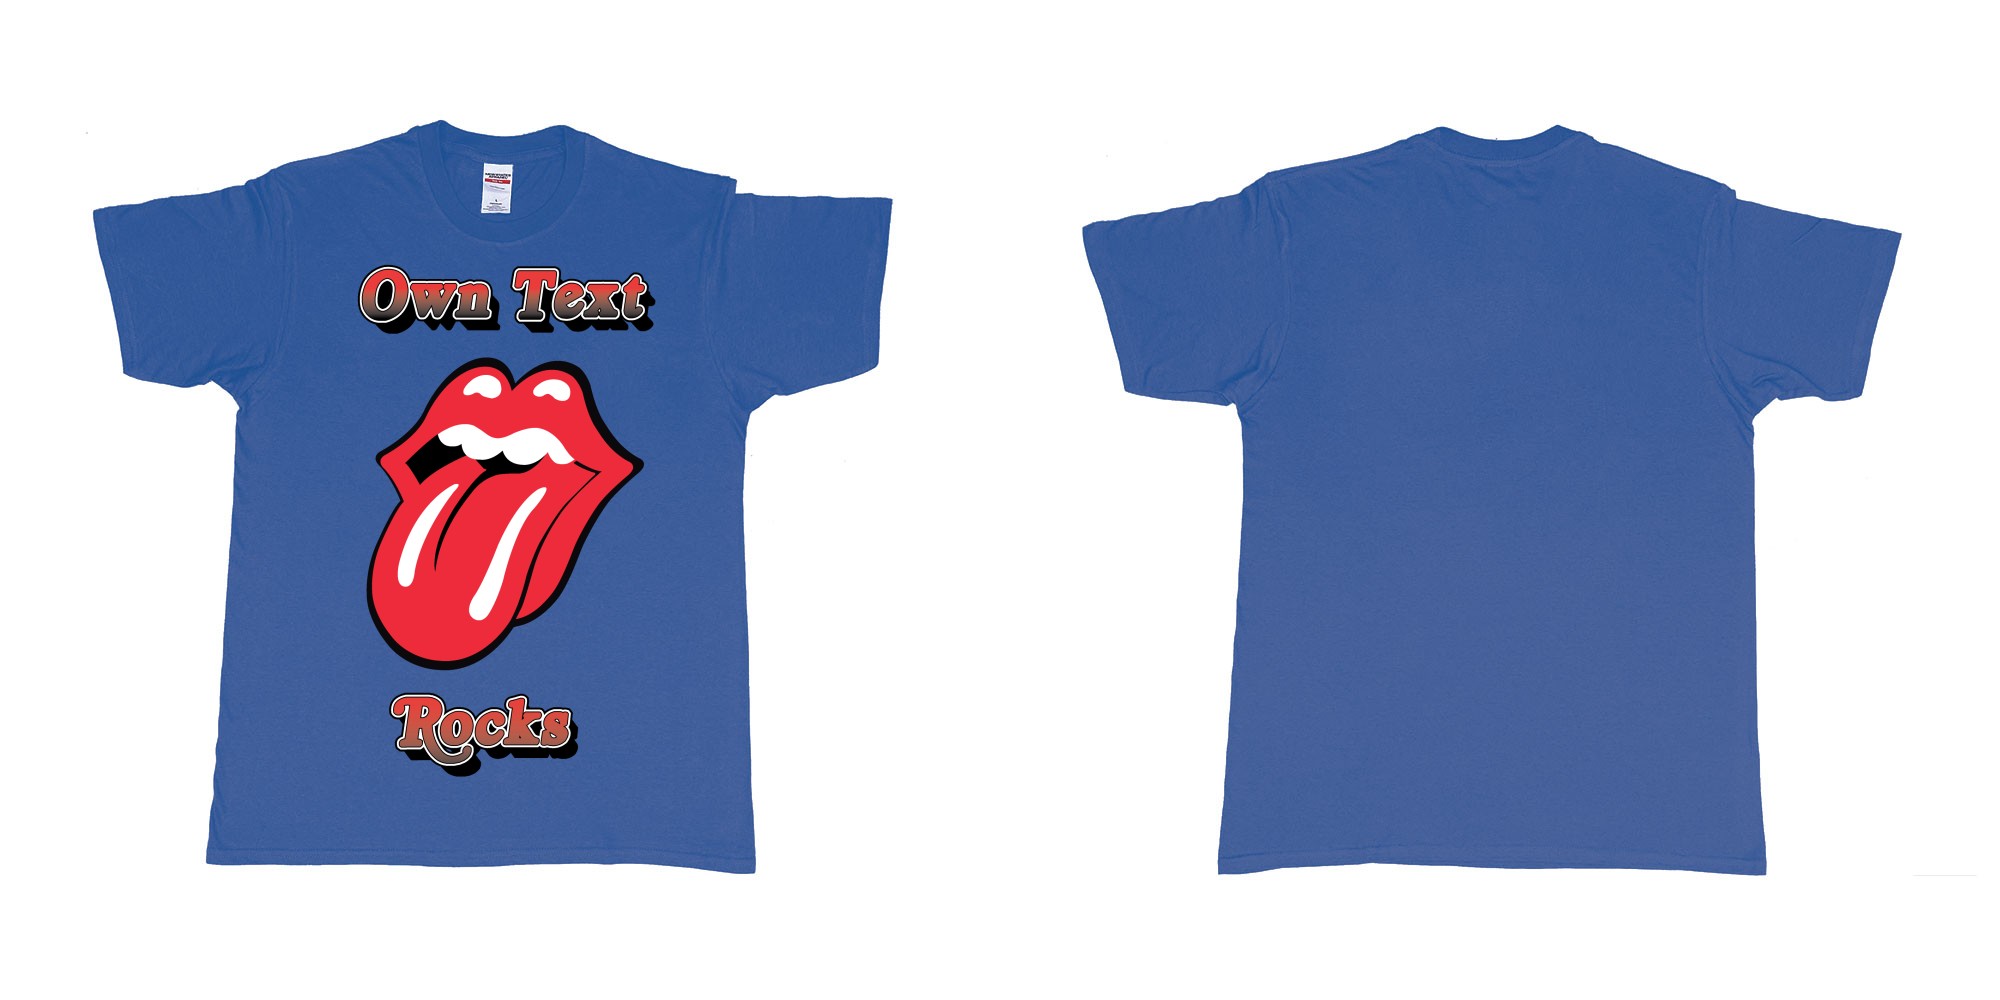 Custom tshirt design own custom text rocks rolling stones logo red tongue and lips print bali in fabric color royal-blue choice your own text made in Bali by The Pirate Way